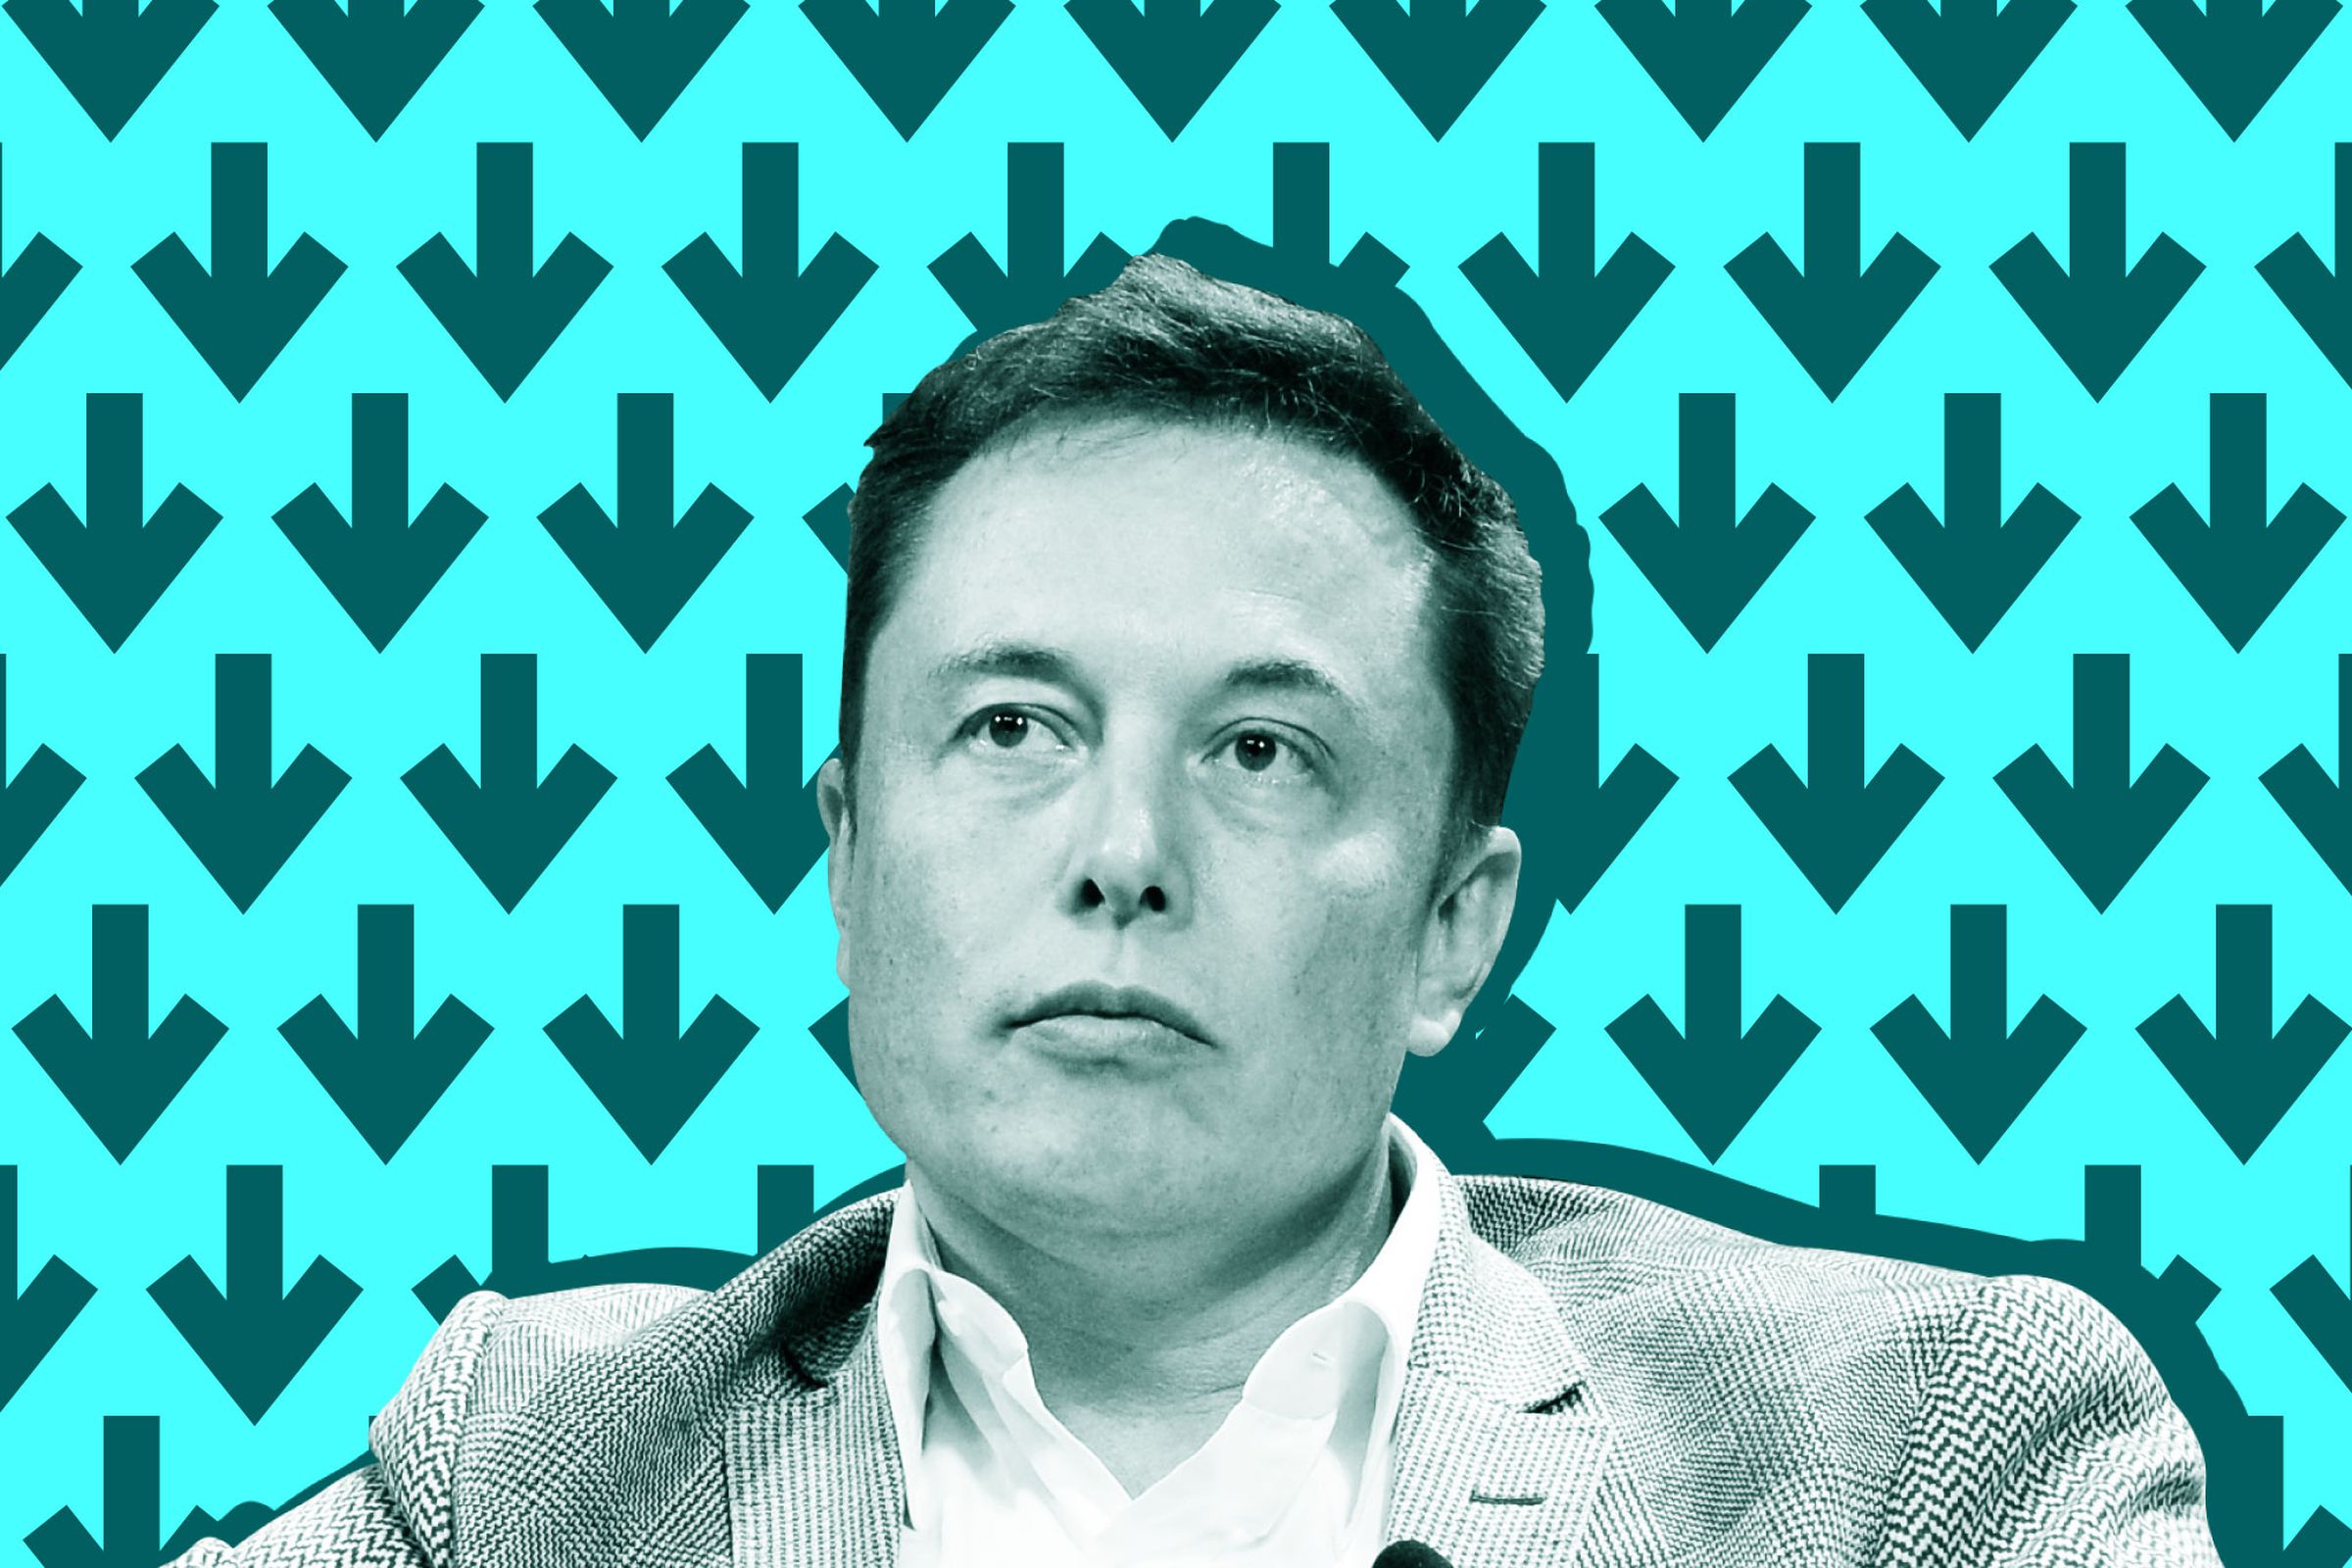 Elon Musk on a blue backdrop surrounded by downward pointing arrows